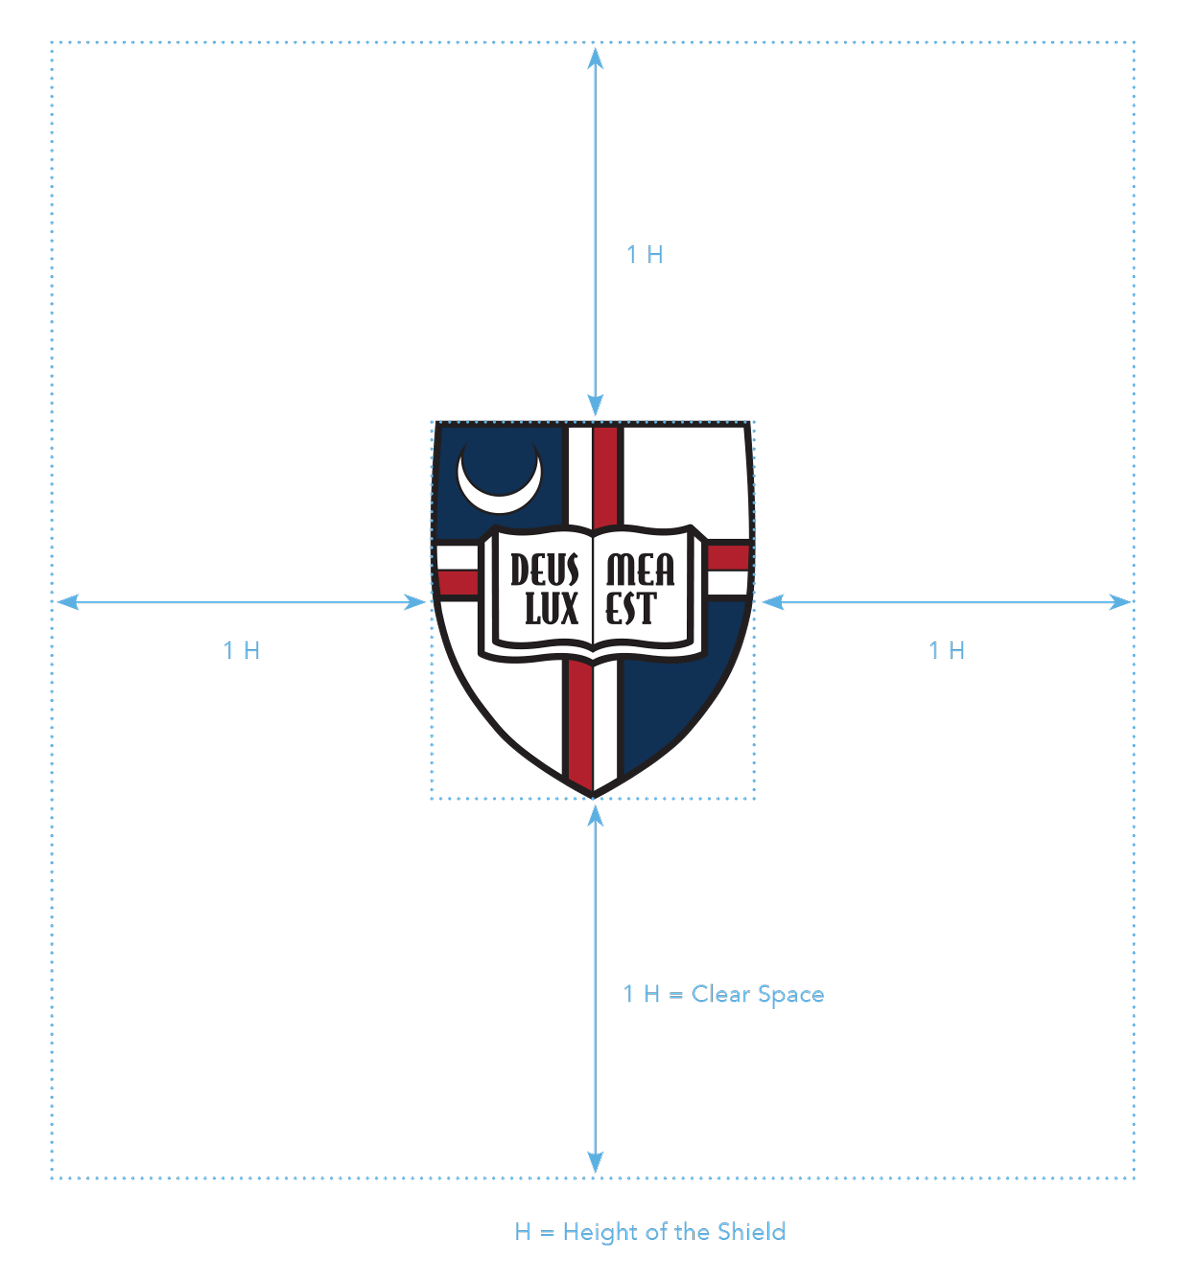 University Identity - shield clear space graphic